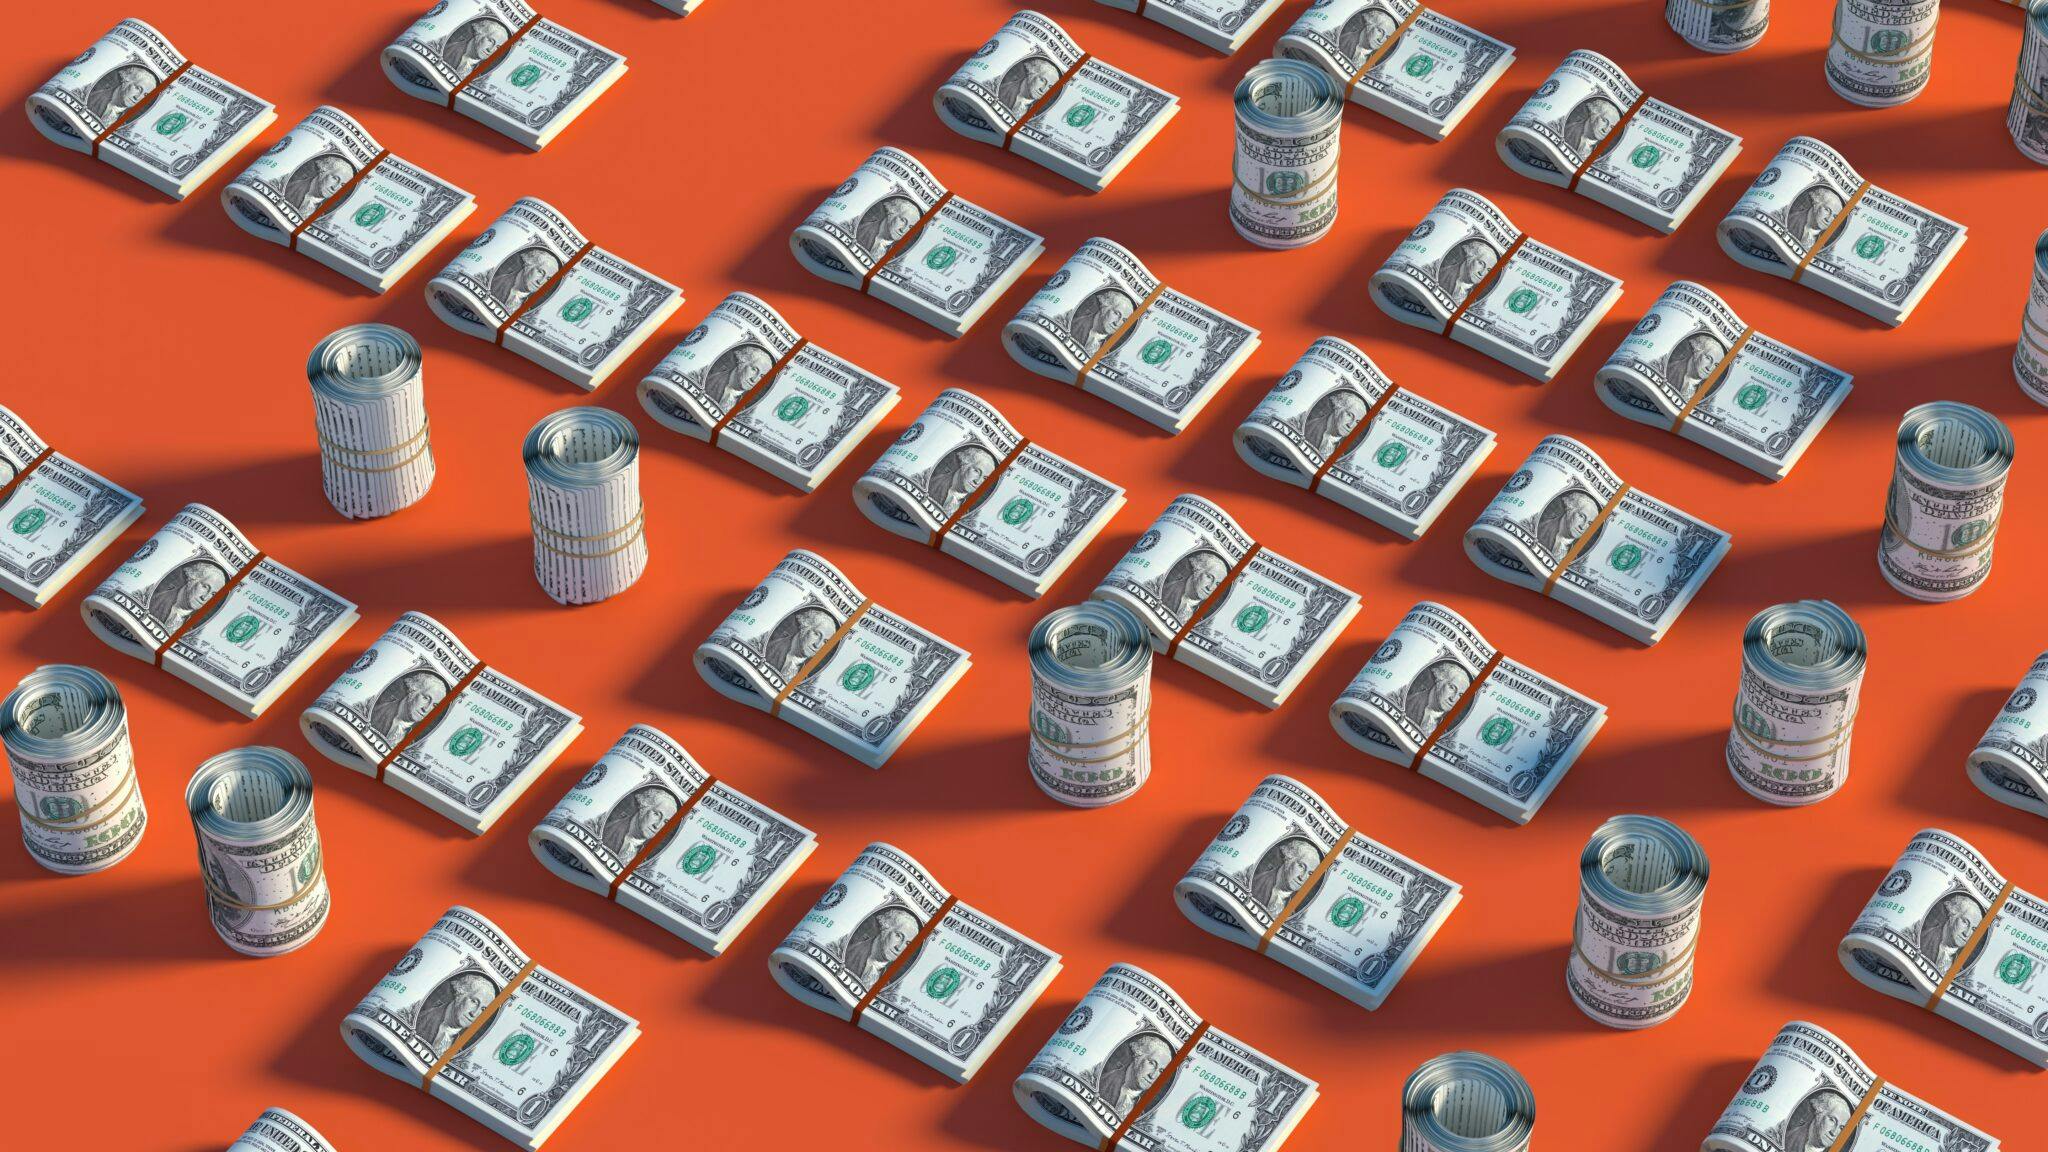 Stacks and rolls of dollars on a orange background